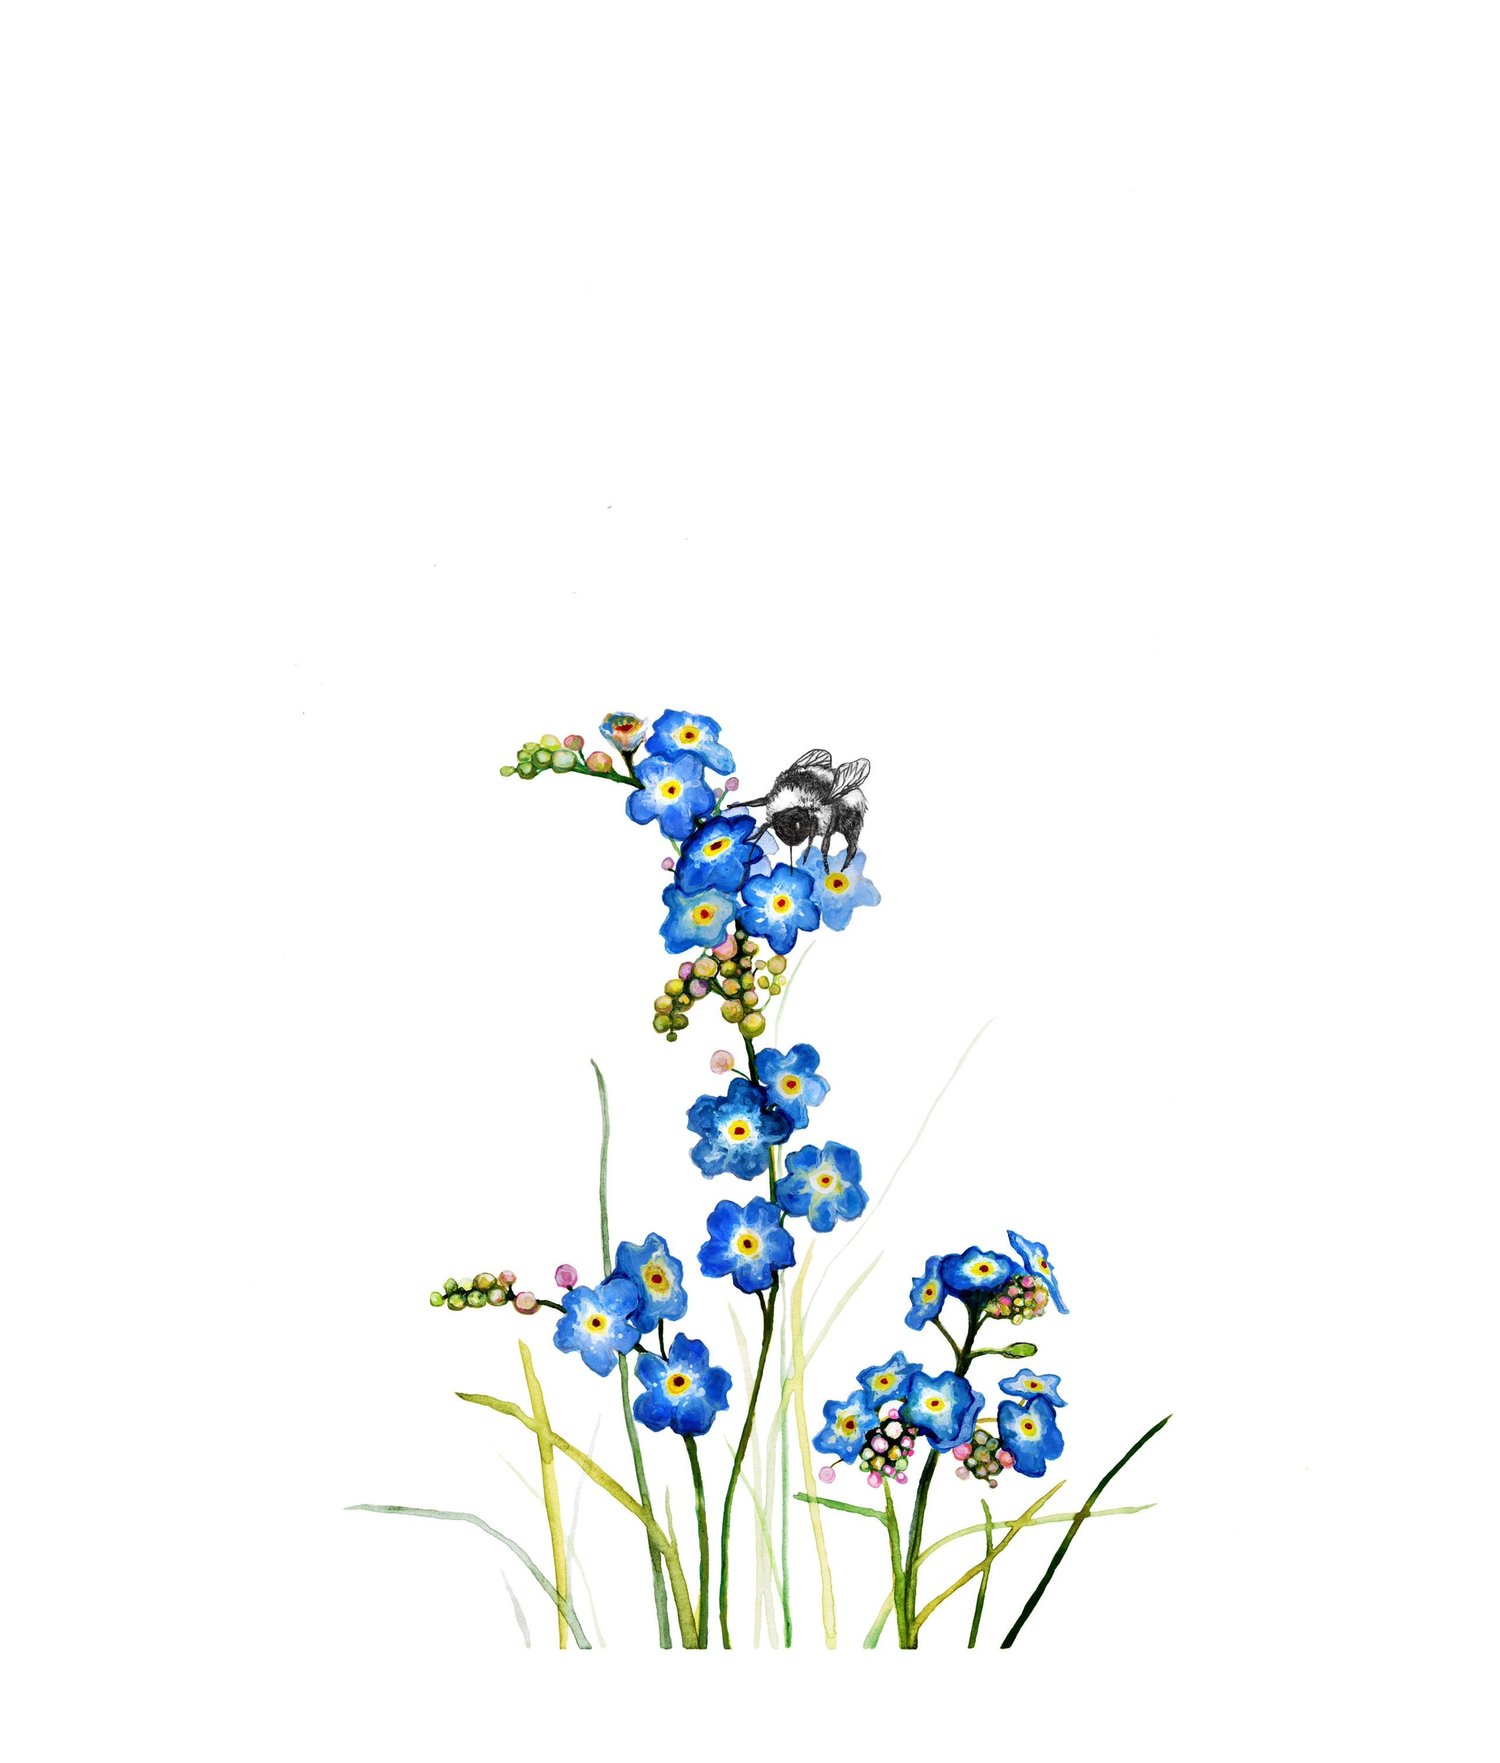 Forget-Me-Not Waterproof Sticker – Botanical Bright - Add a Little Beauty  to Your Everyday